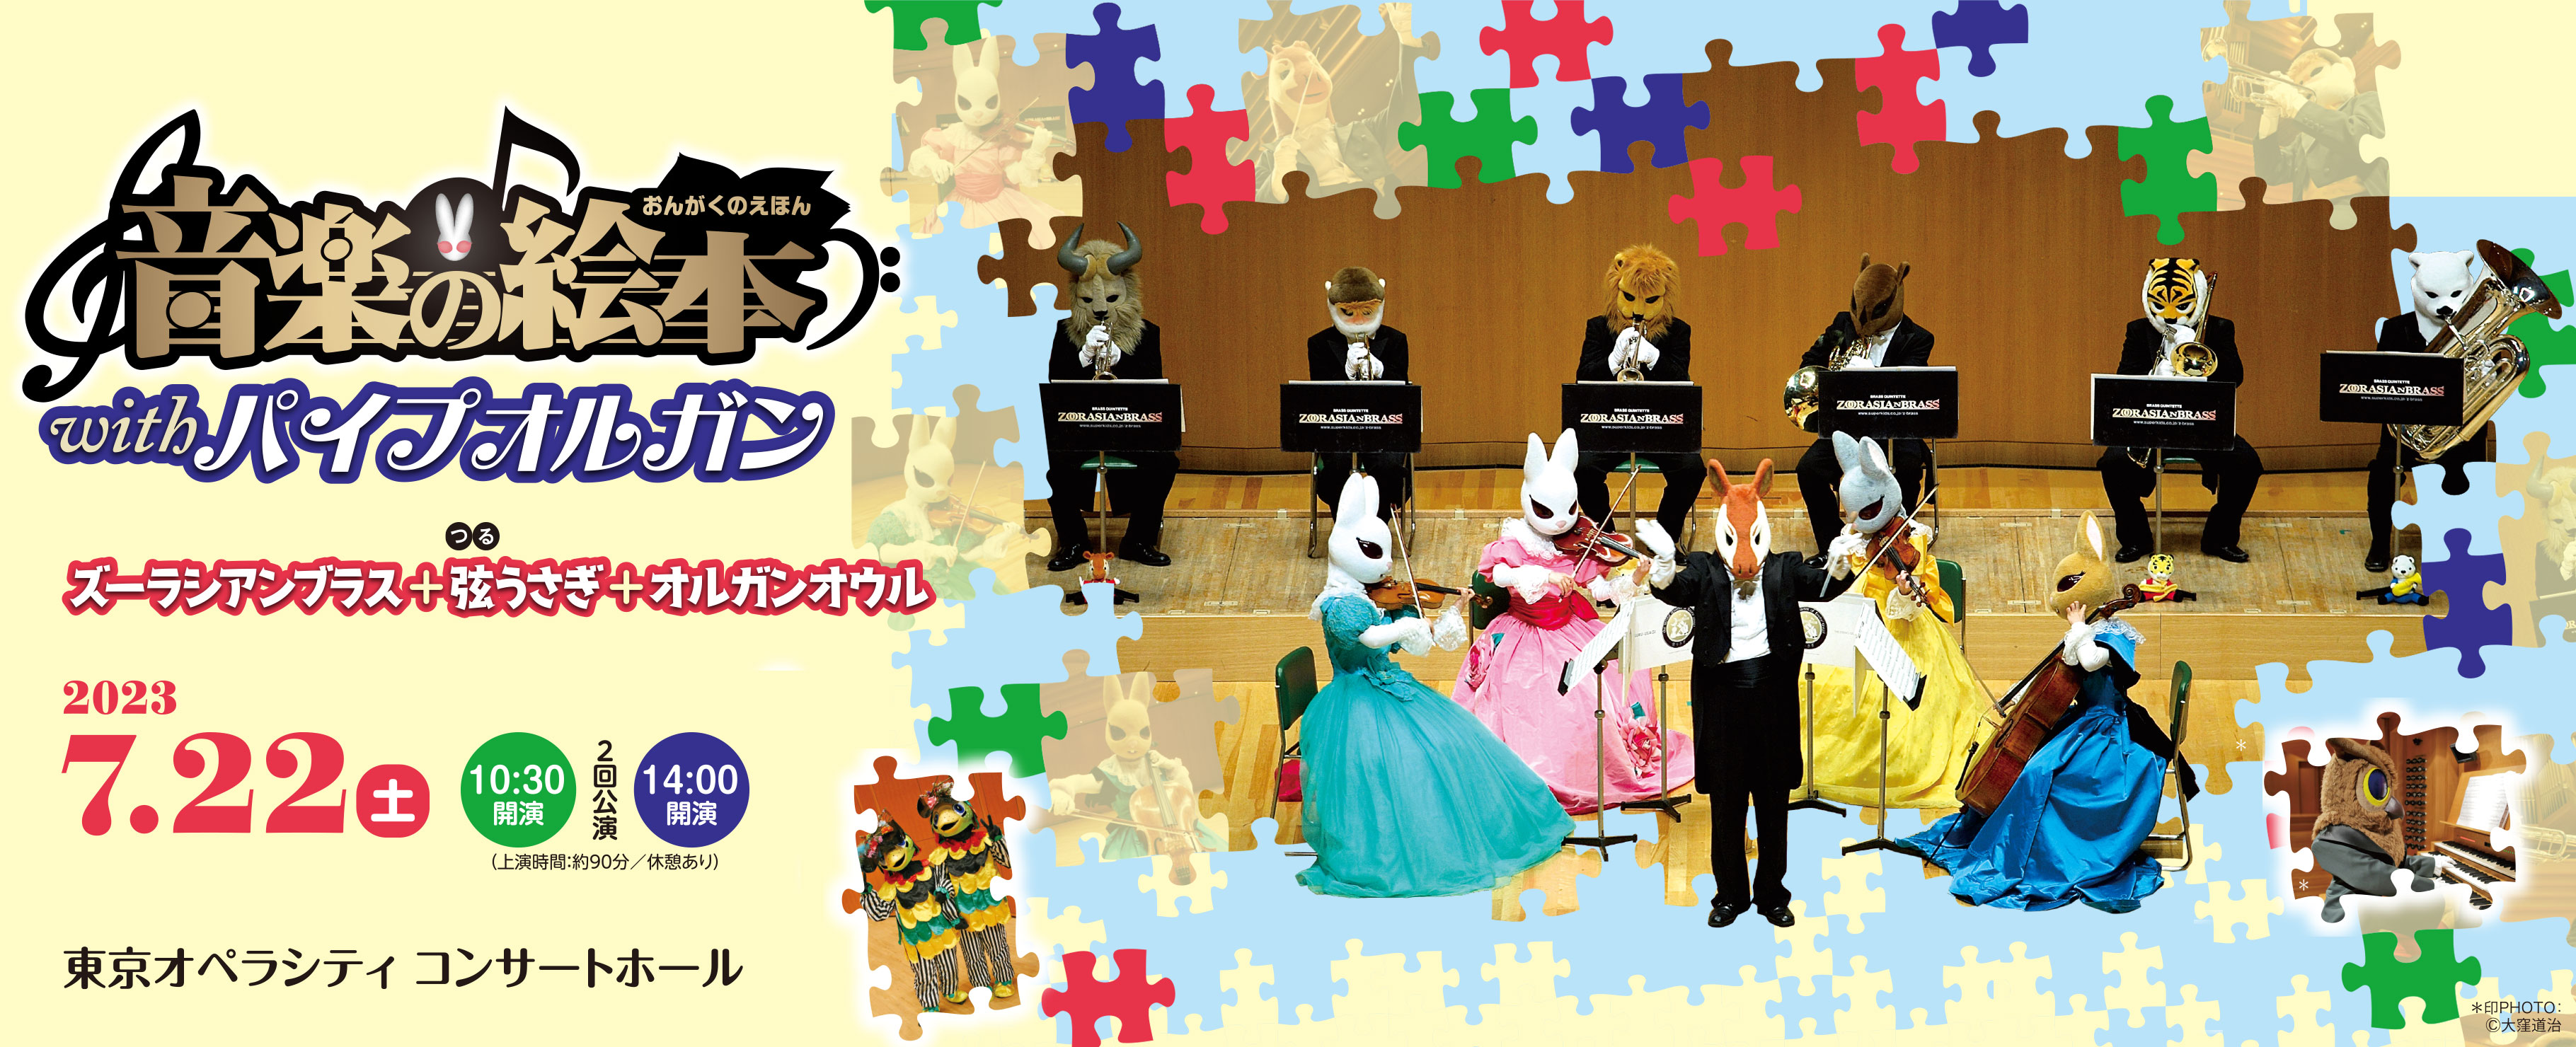 Sat 22 Jul, 2023 Ongaku-no-Ehon with Pipe Organ (Concert for Children) 